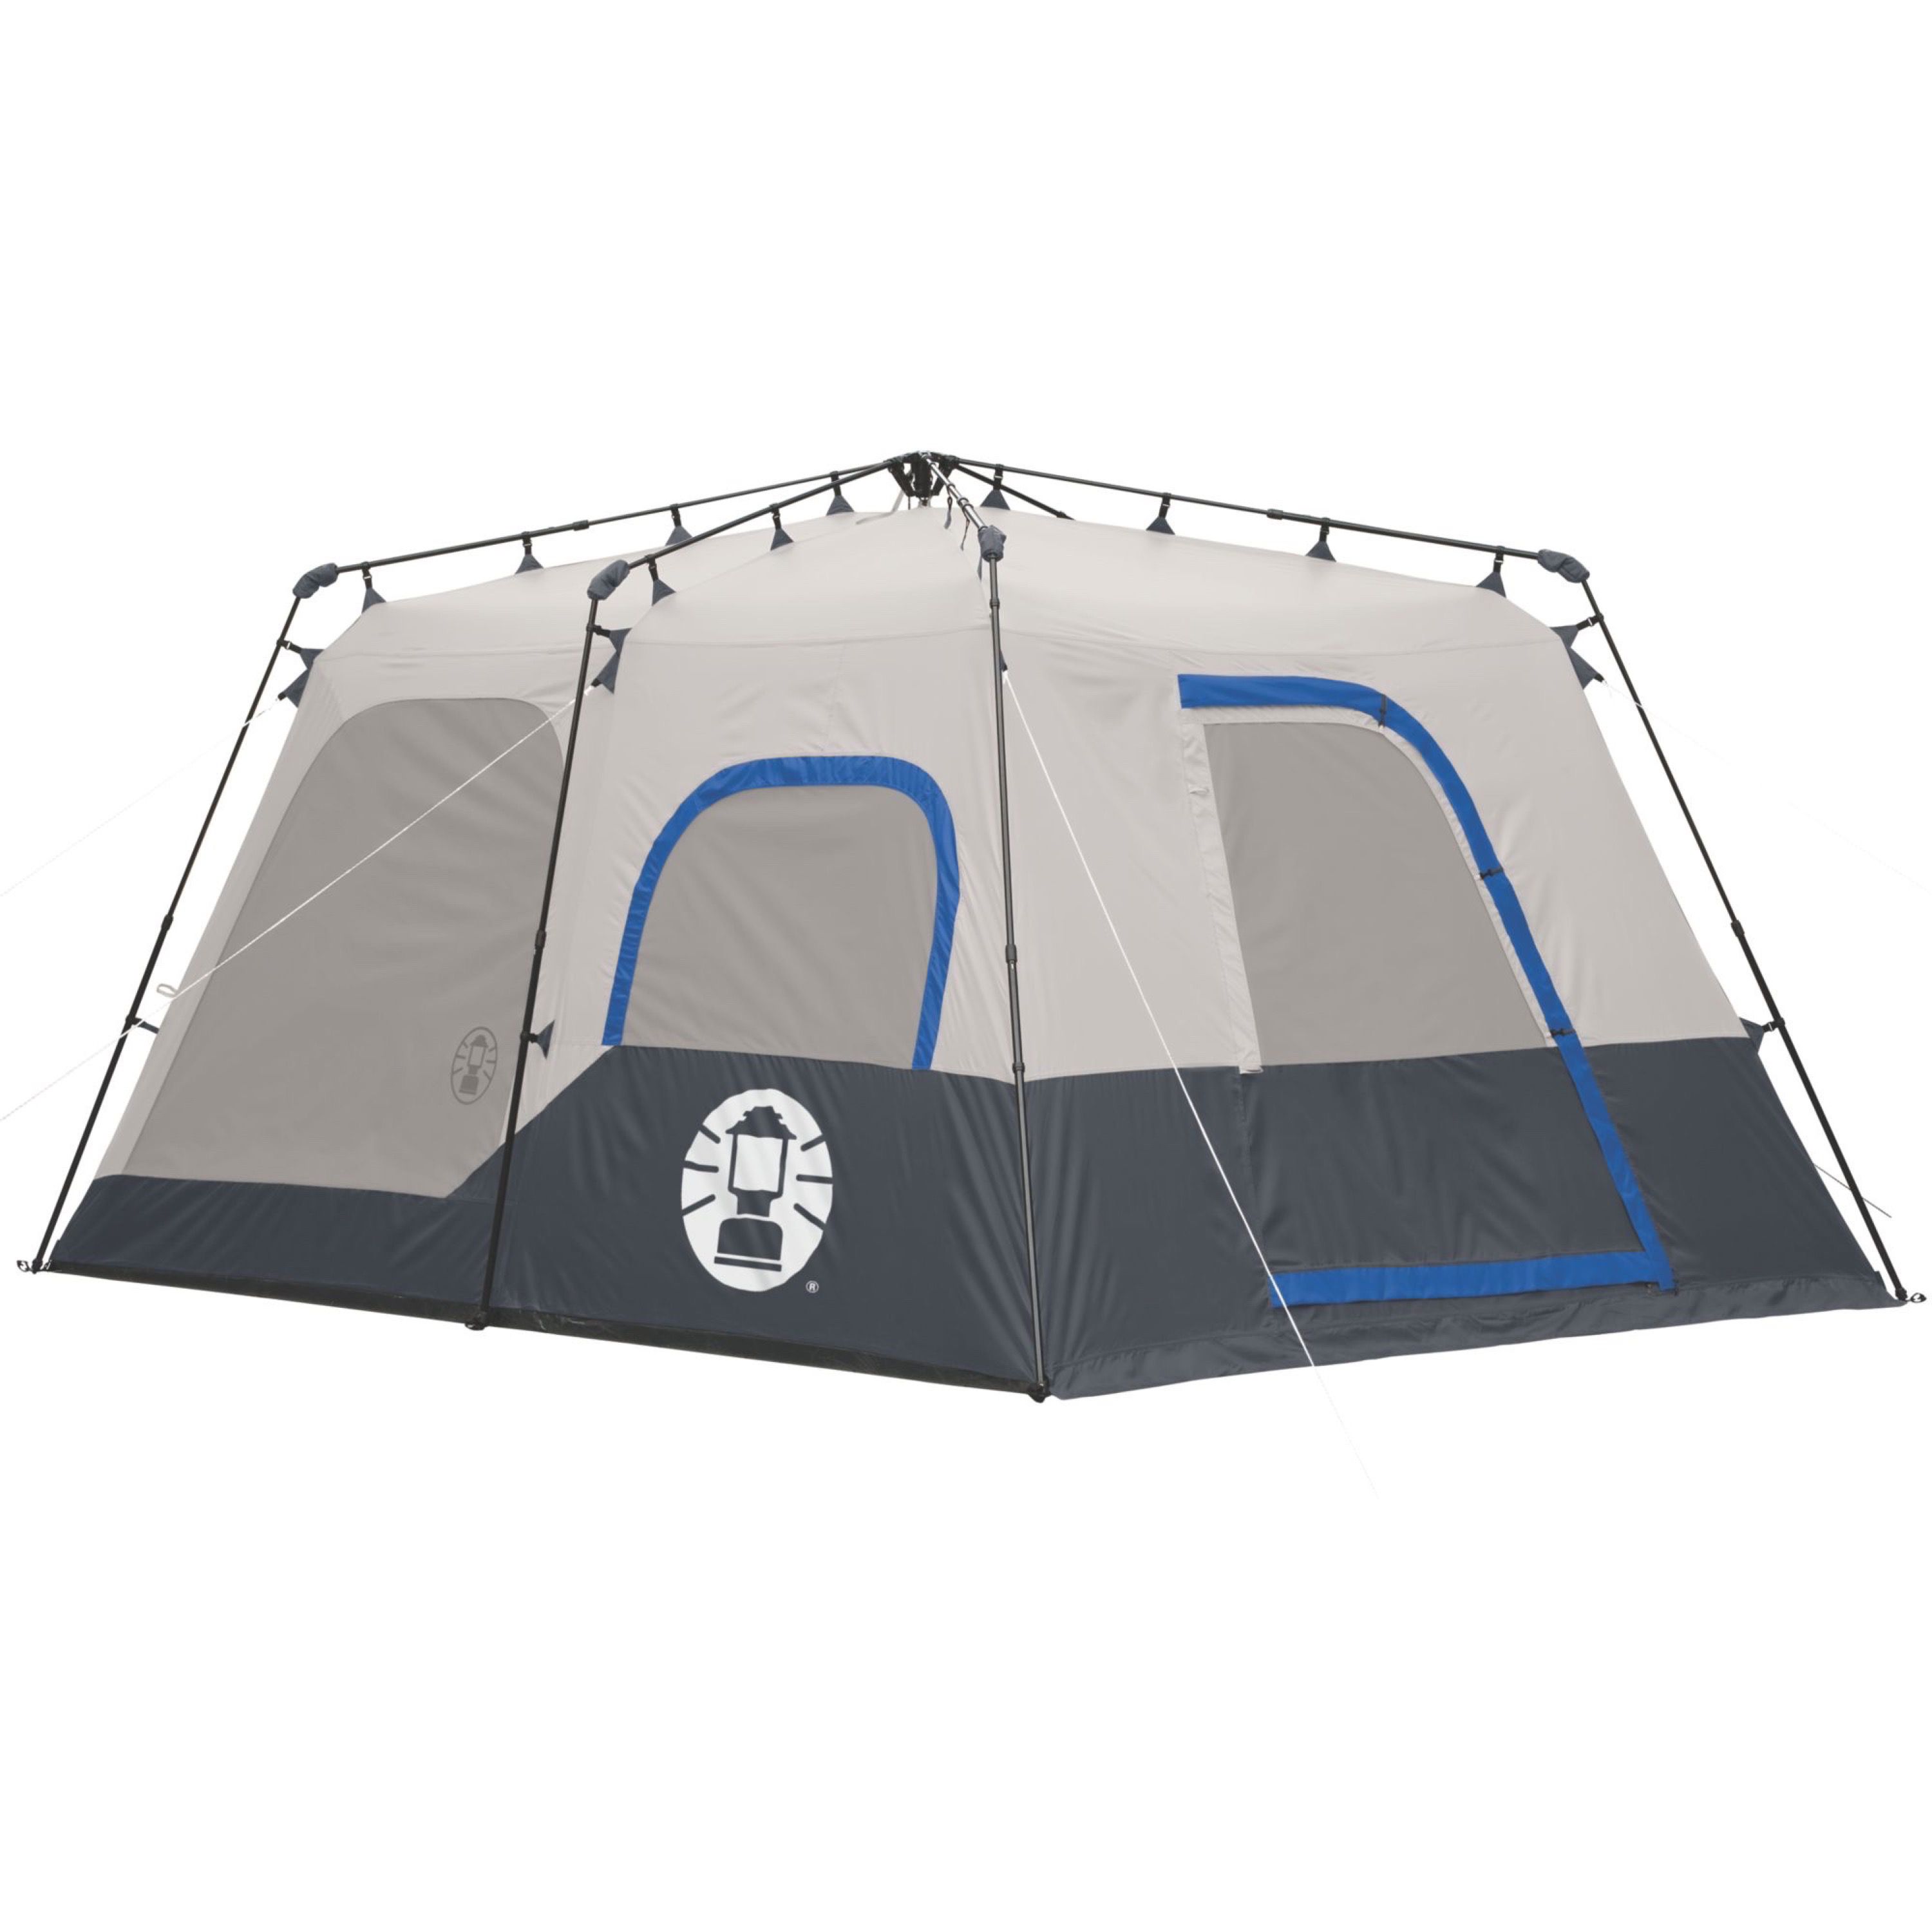 Coleman 8-Person Instant Tent - image 3 of 14